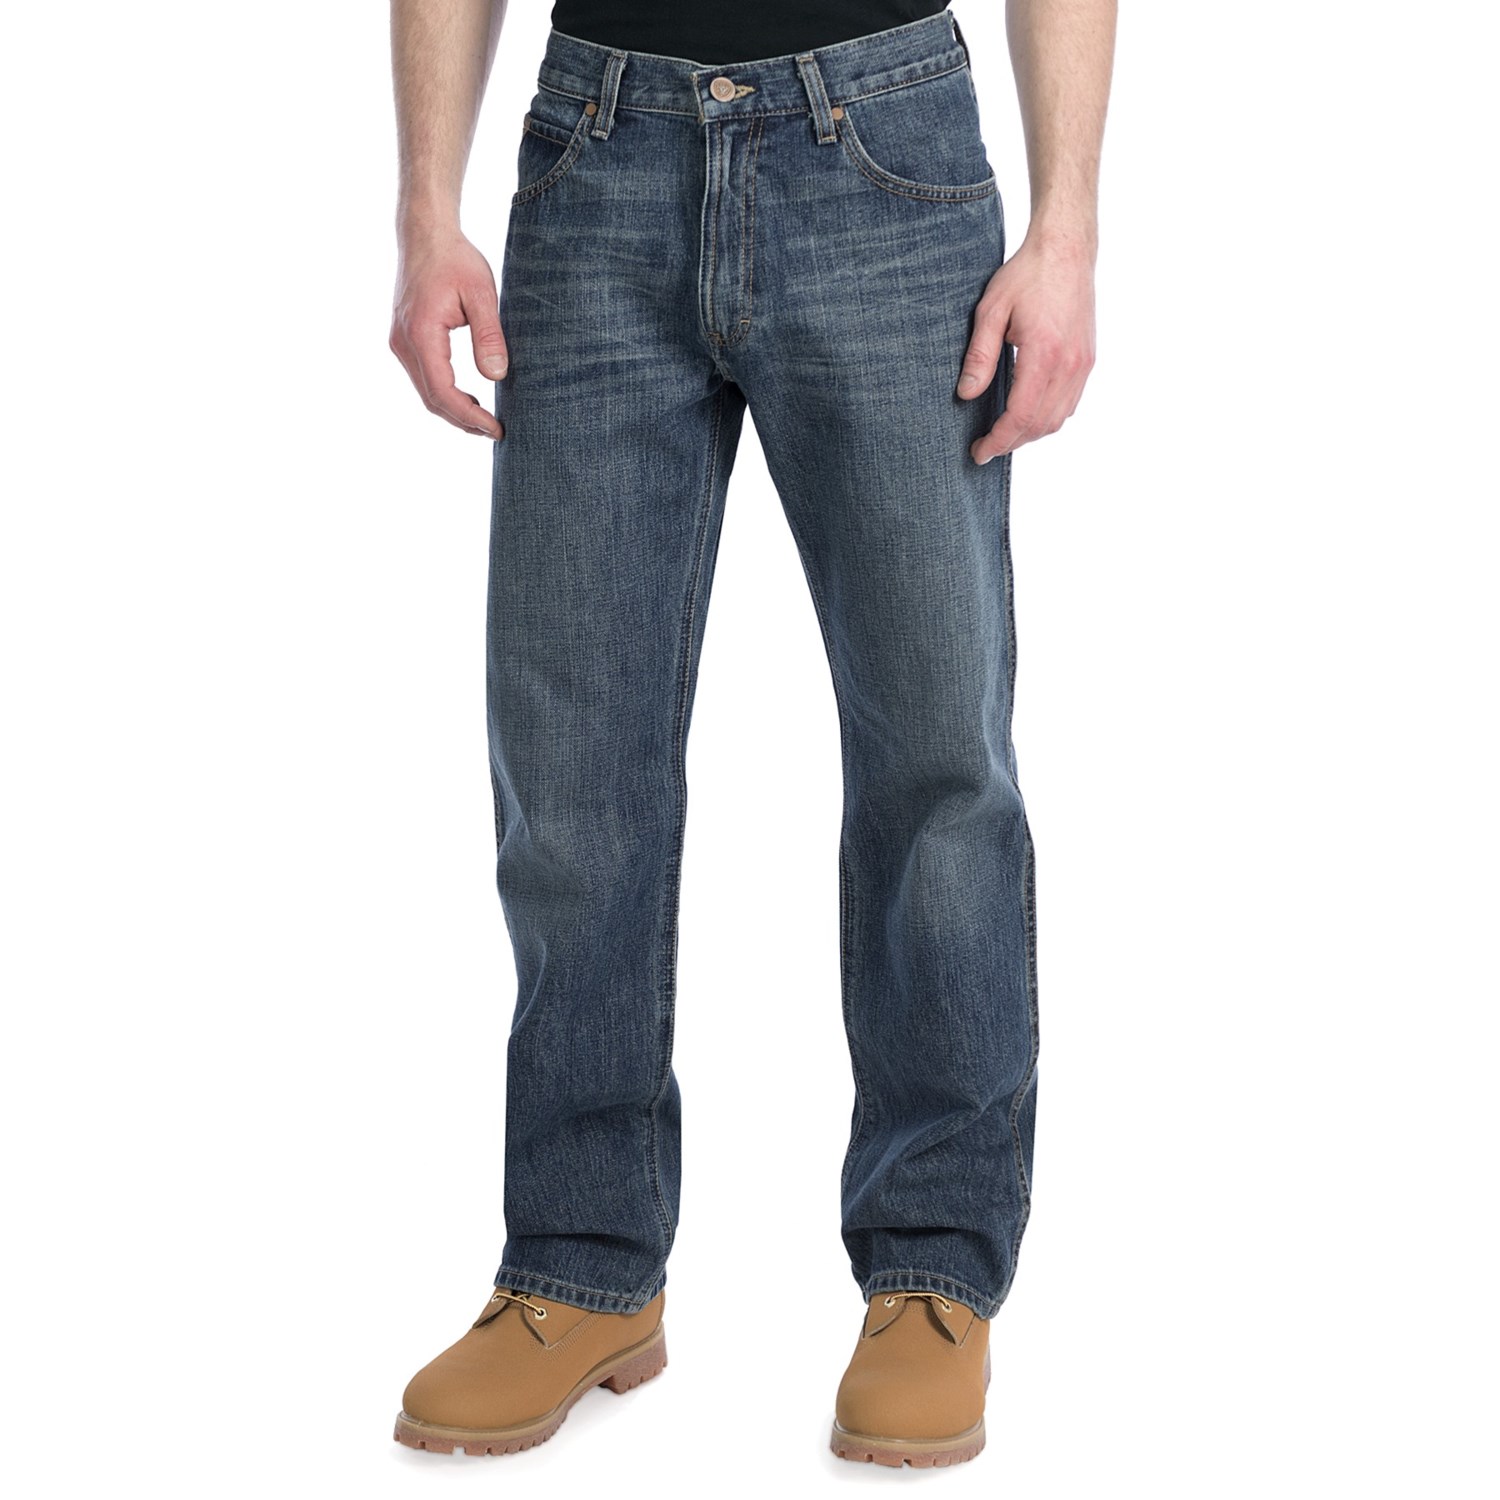 Ariat M3 Athletic Jeans (For Men) 5324M - Save 38%